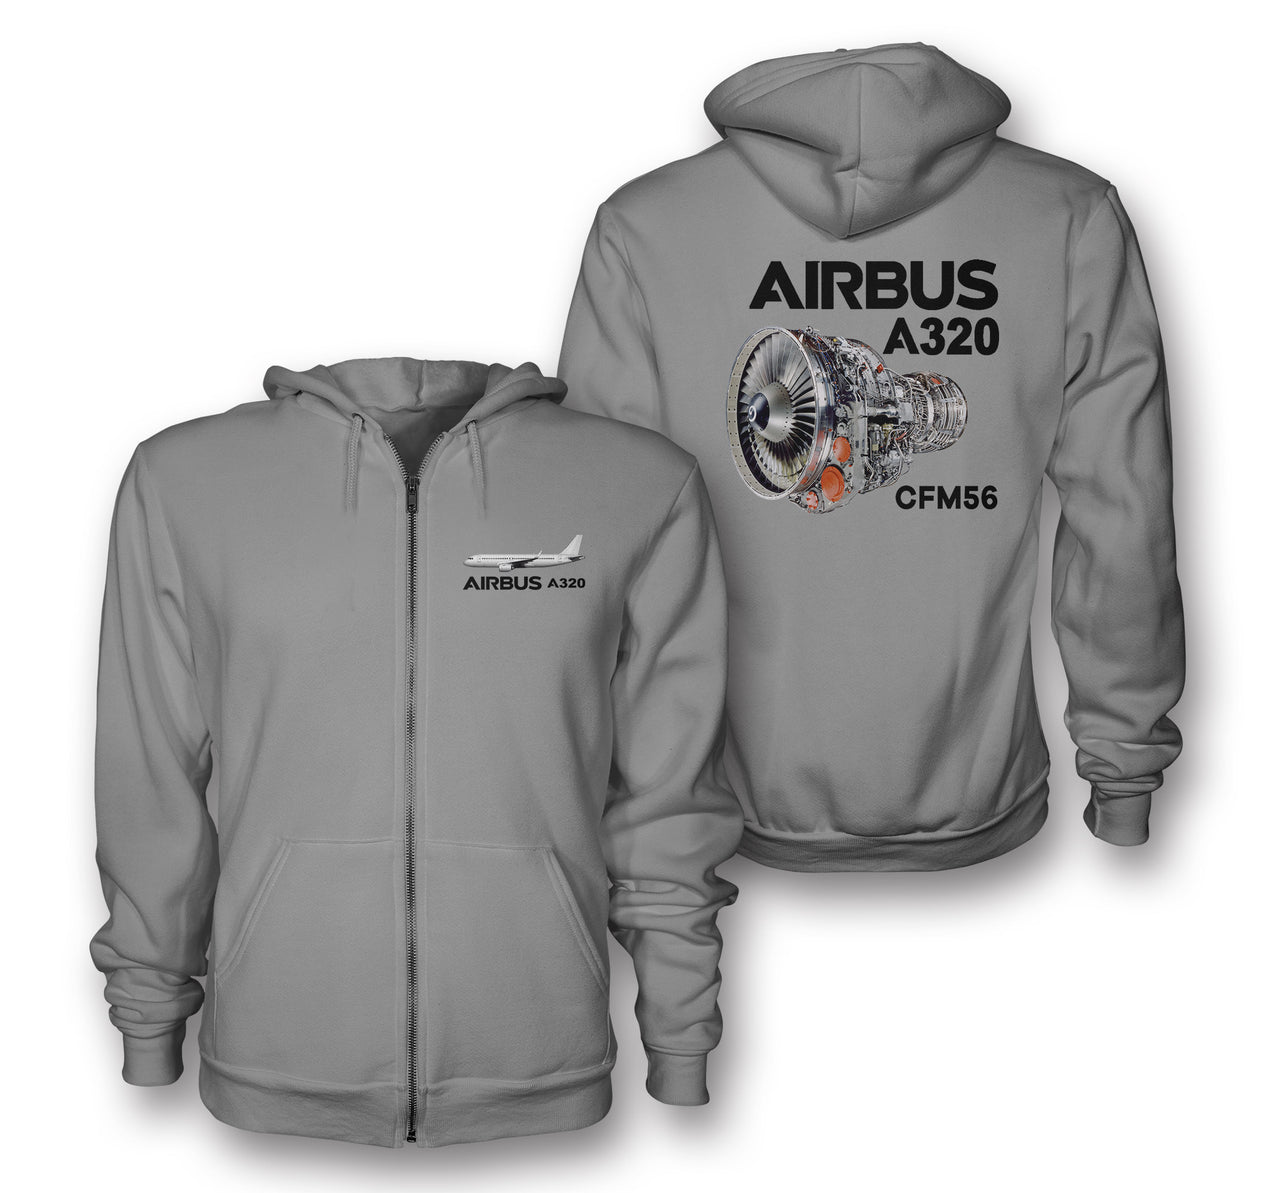 The Airbus A320 & CFM56 Engine Designed Zipped Hoodies